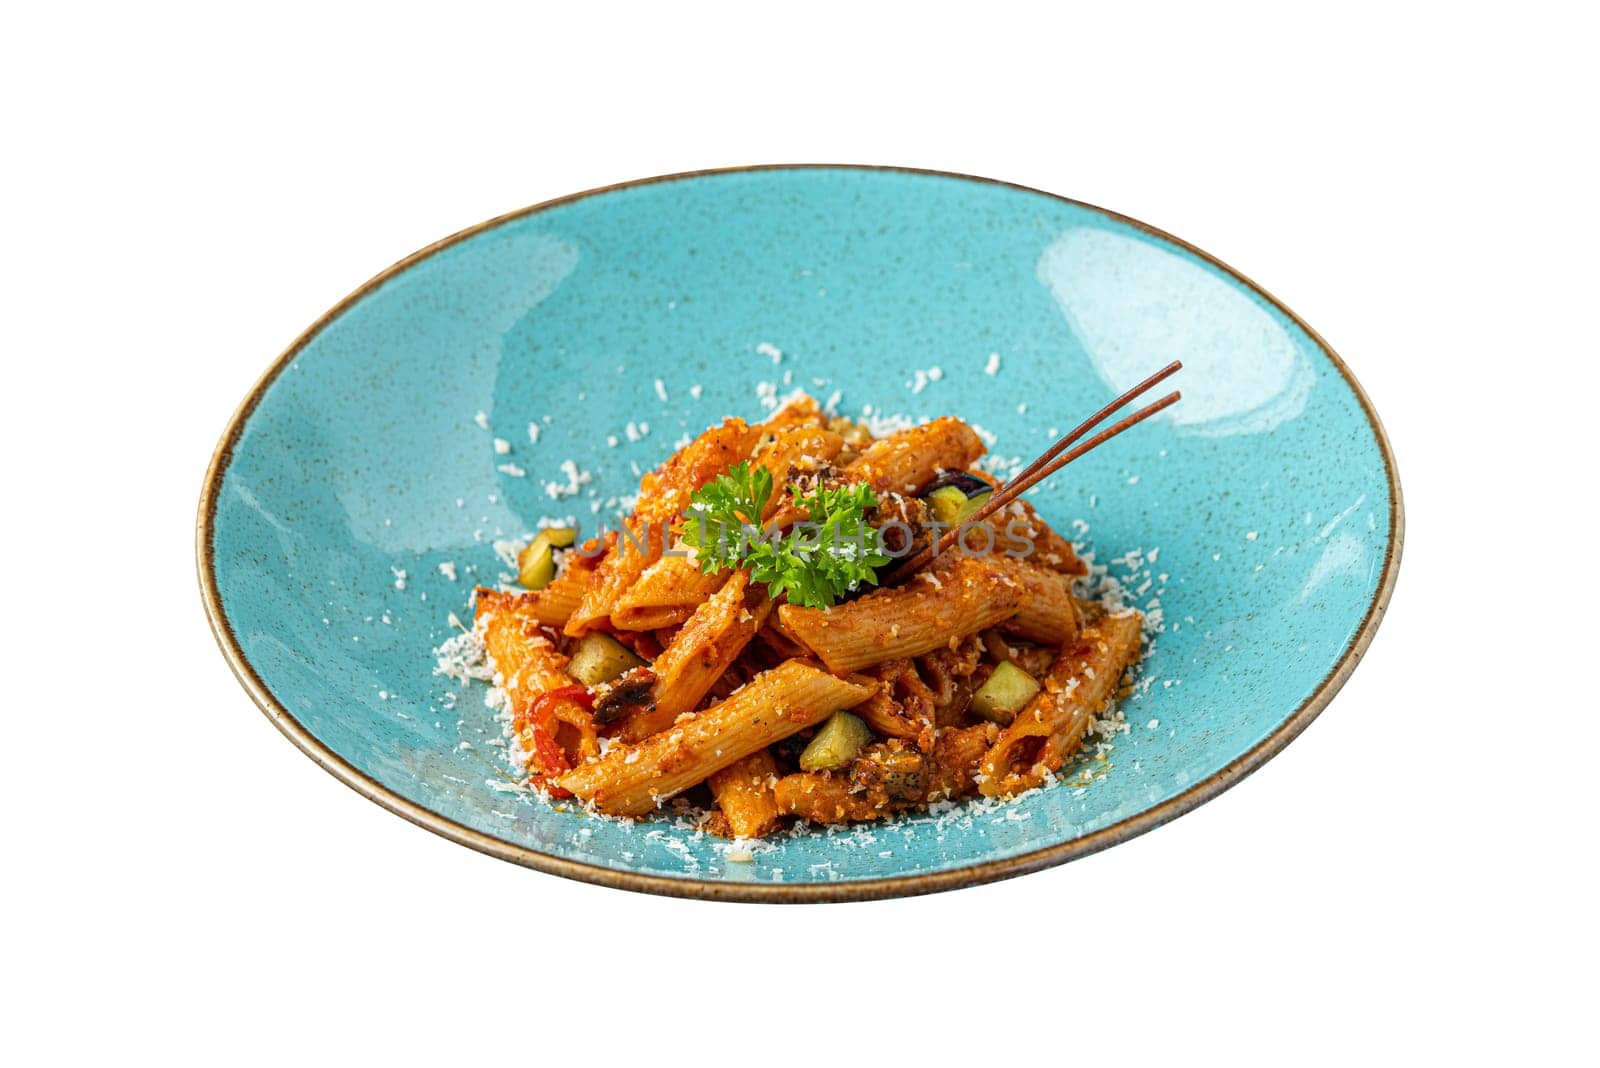 Penne pasta in tomato sauce, tomatoes decorated with parsley on a white background by Sonat